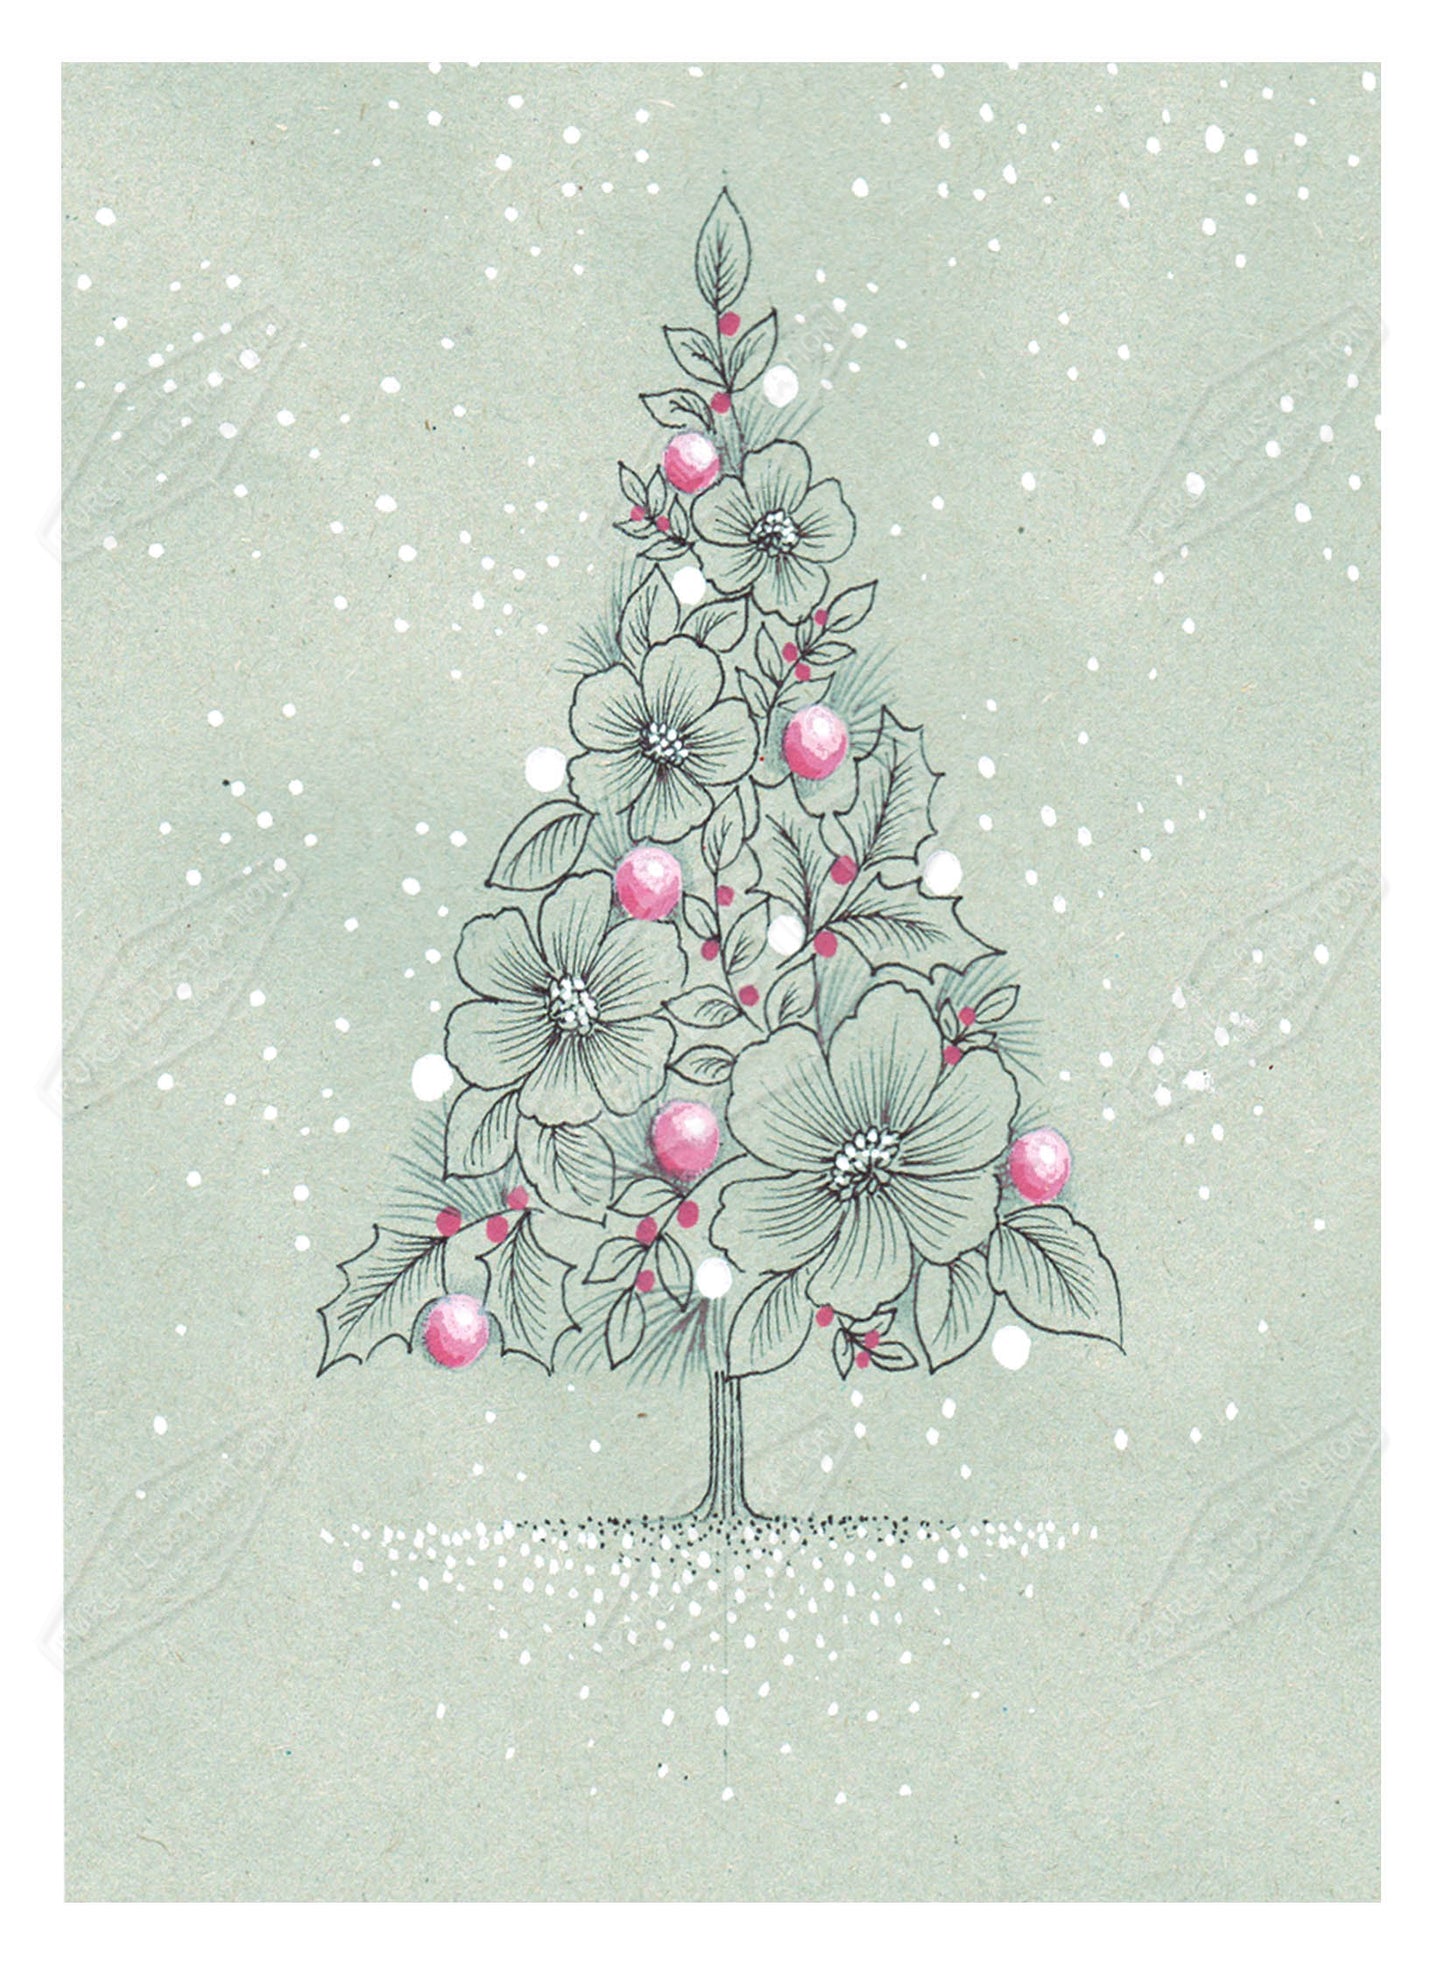 00035719AMA - Ally Marie is represented by Pure Art Licensing Agency - Christmas Greeting Card Design